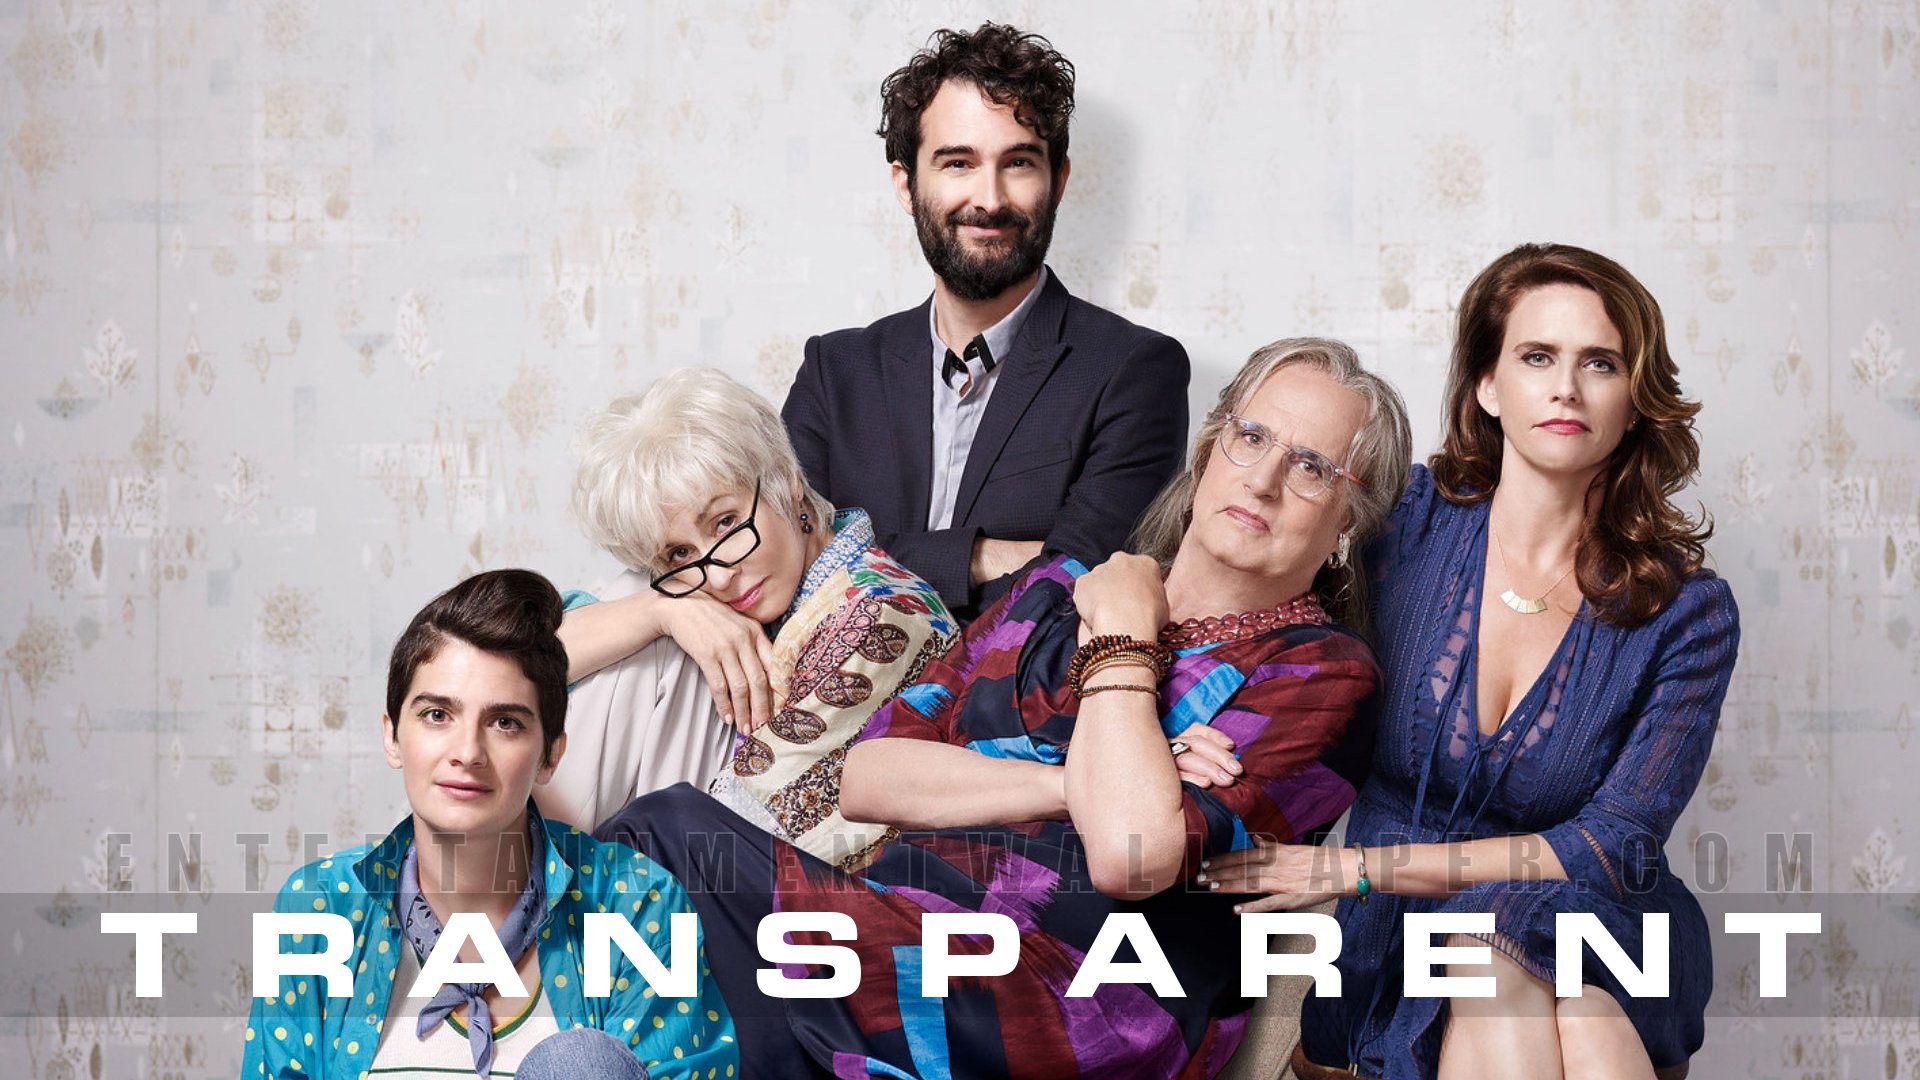 Transparent Tv Series Images Transparent Wallpapers Hd Wallpaper And Background Photos 1920x1080